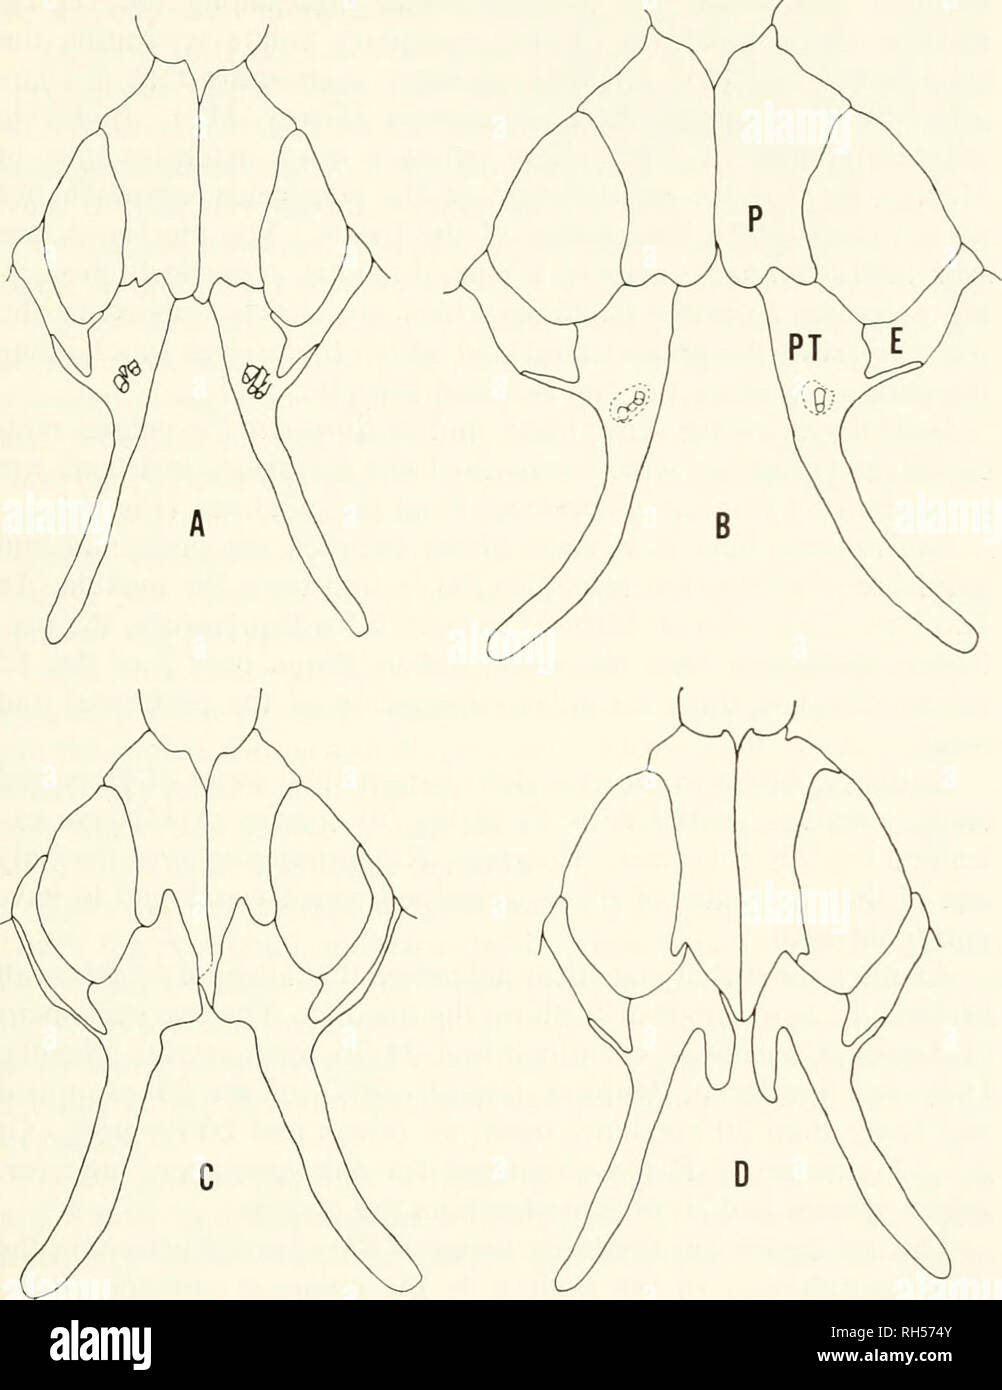 . Breviora. 1967 GENERIC RELATIONSHIPS OF EUMECIA. Figure 1. Ventral view of the secondary palate of: A) Eumecia anchie- tae (MCZ 41562), Kaimosi, Kakamega, Kenya: B) Mahuya polytropis (MCZ 8103), Krilii Cameroon; C) Riopa punctata (MCZ 3238). 70 miles SW of Amballa, India: D) Leptosiaphos hlochmanni (untagged MCZ specimen). Upper Mulinga, Idjwi, Id., Congo. Abbreviations: E, ectopterygoid; P, palatine; PT, pterygoid. A and B drawn to one scale and C and D drawn to another scale.. Please note that these images are extracted from scanned page images that may have been digitally enhanced for rea Stock Photo